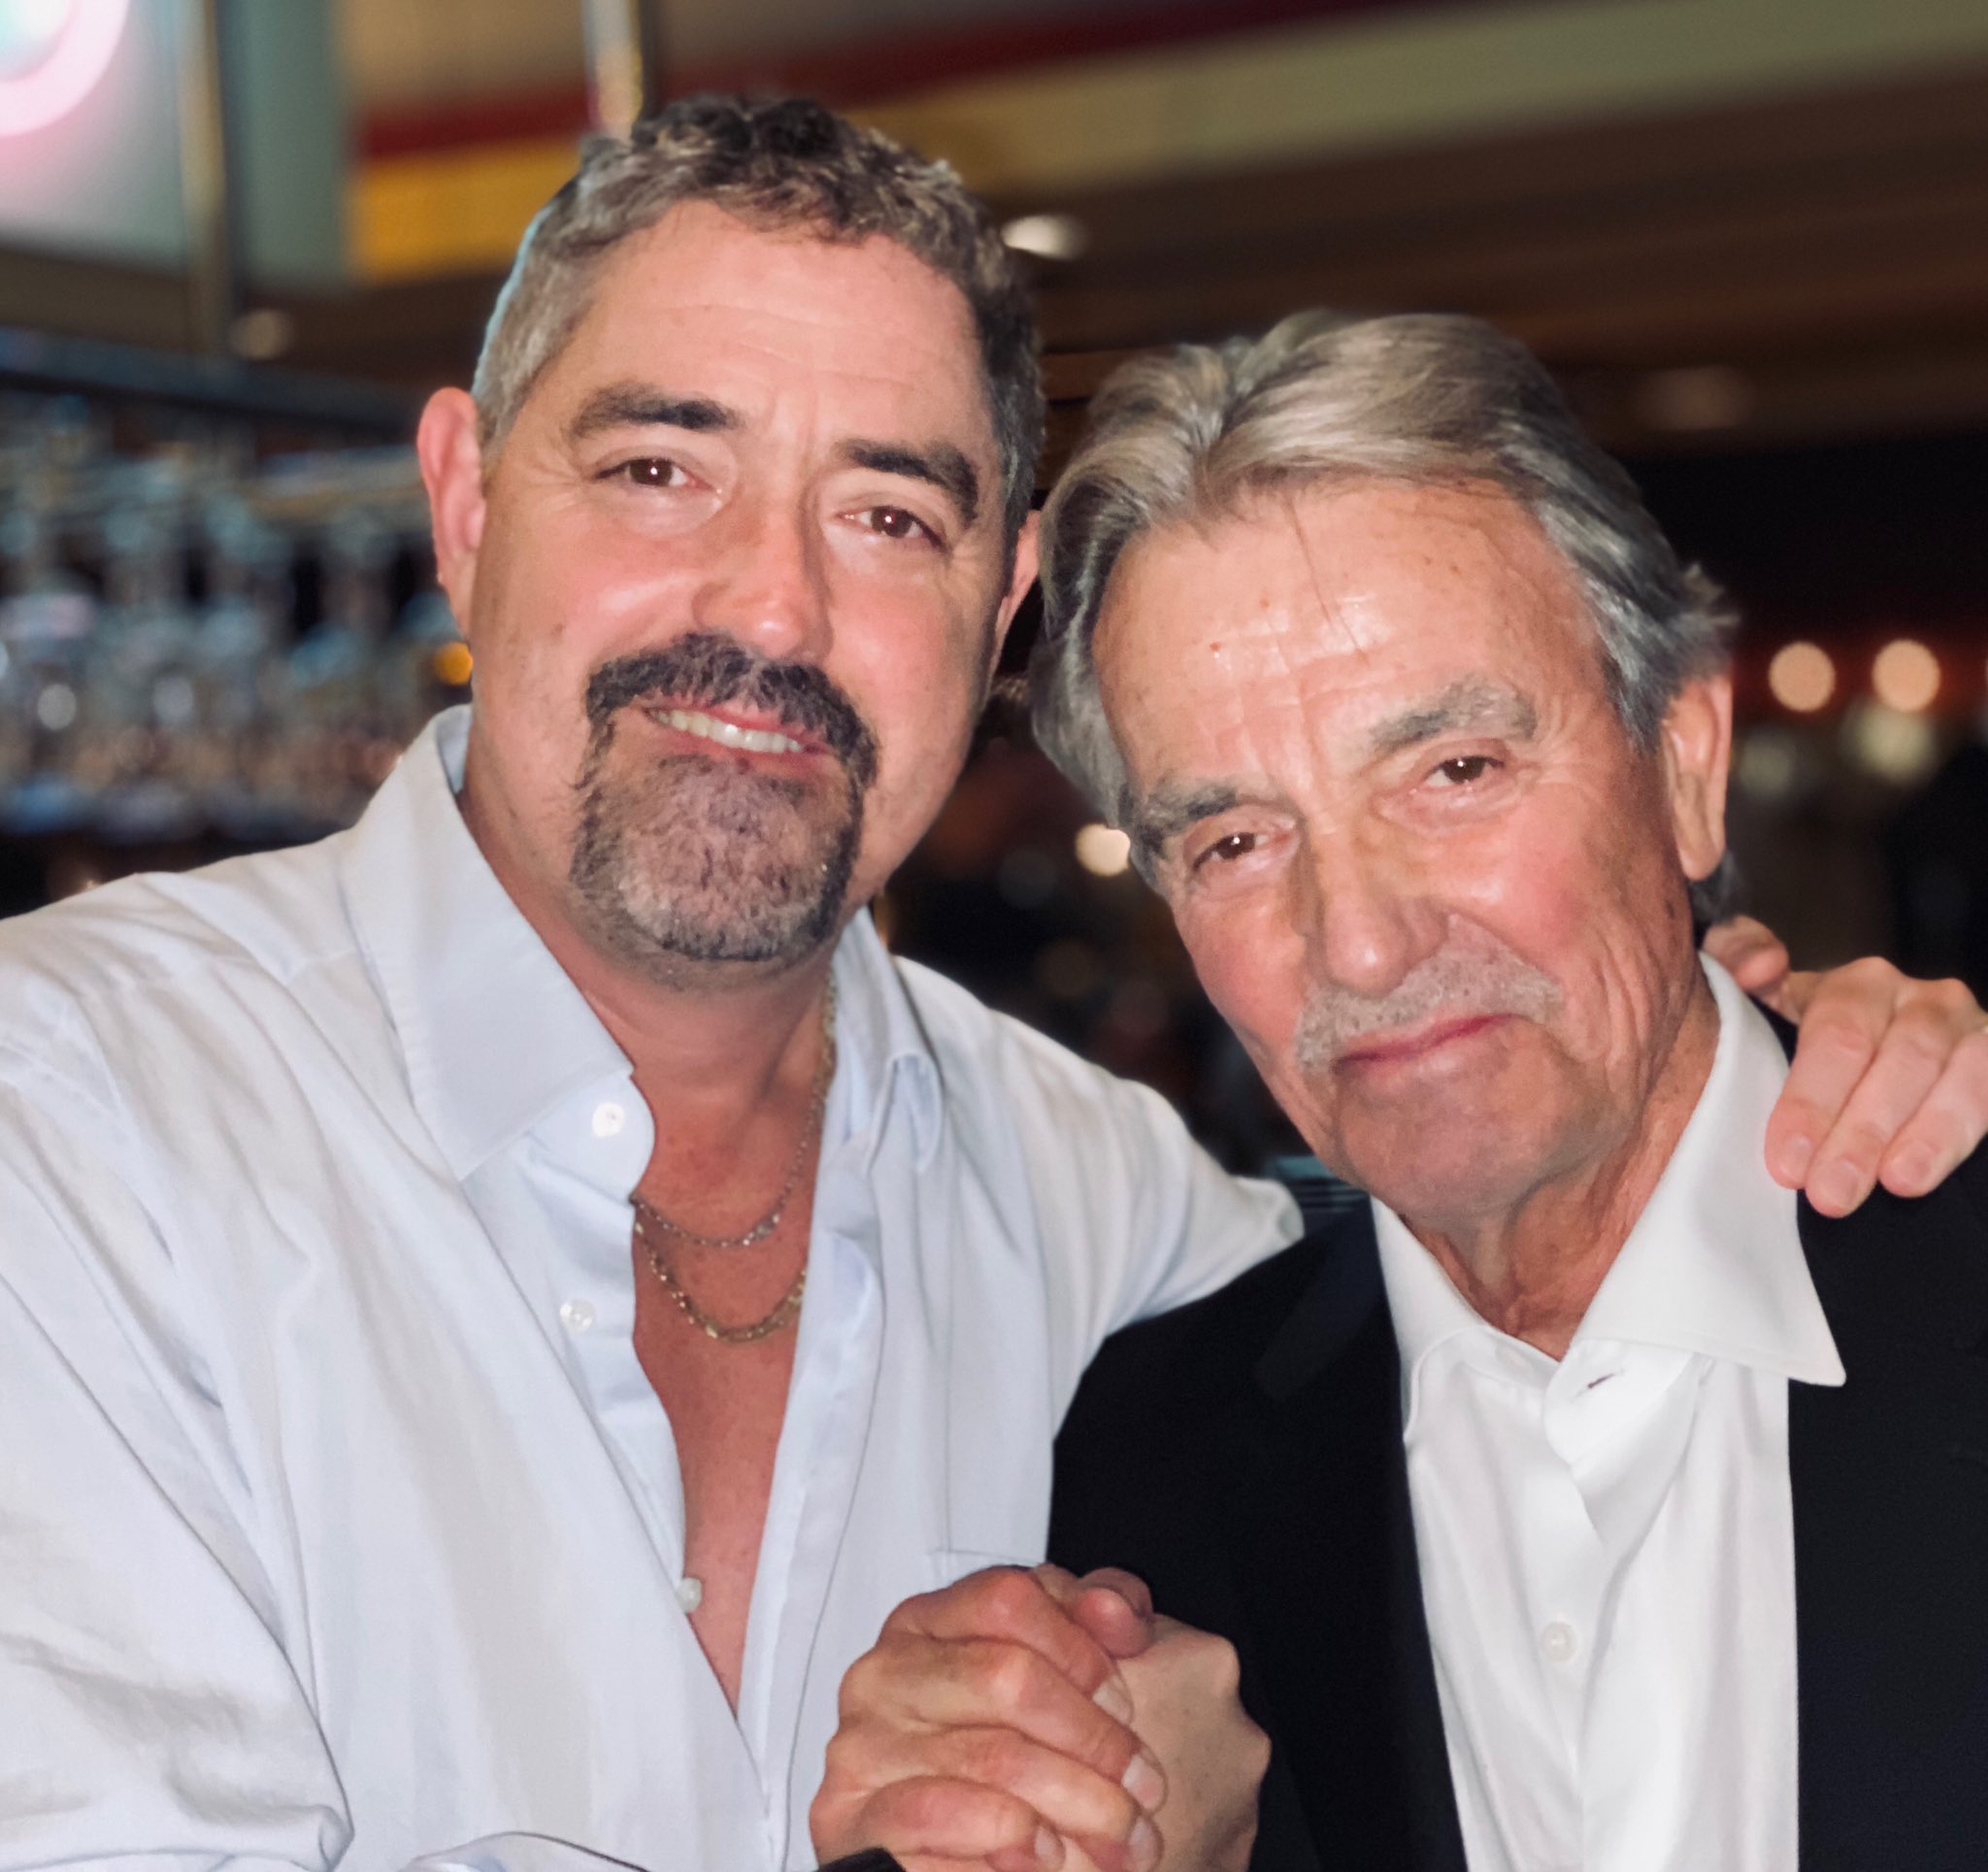 Eric Braeden and his son Christian